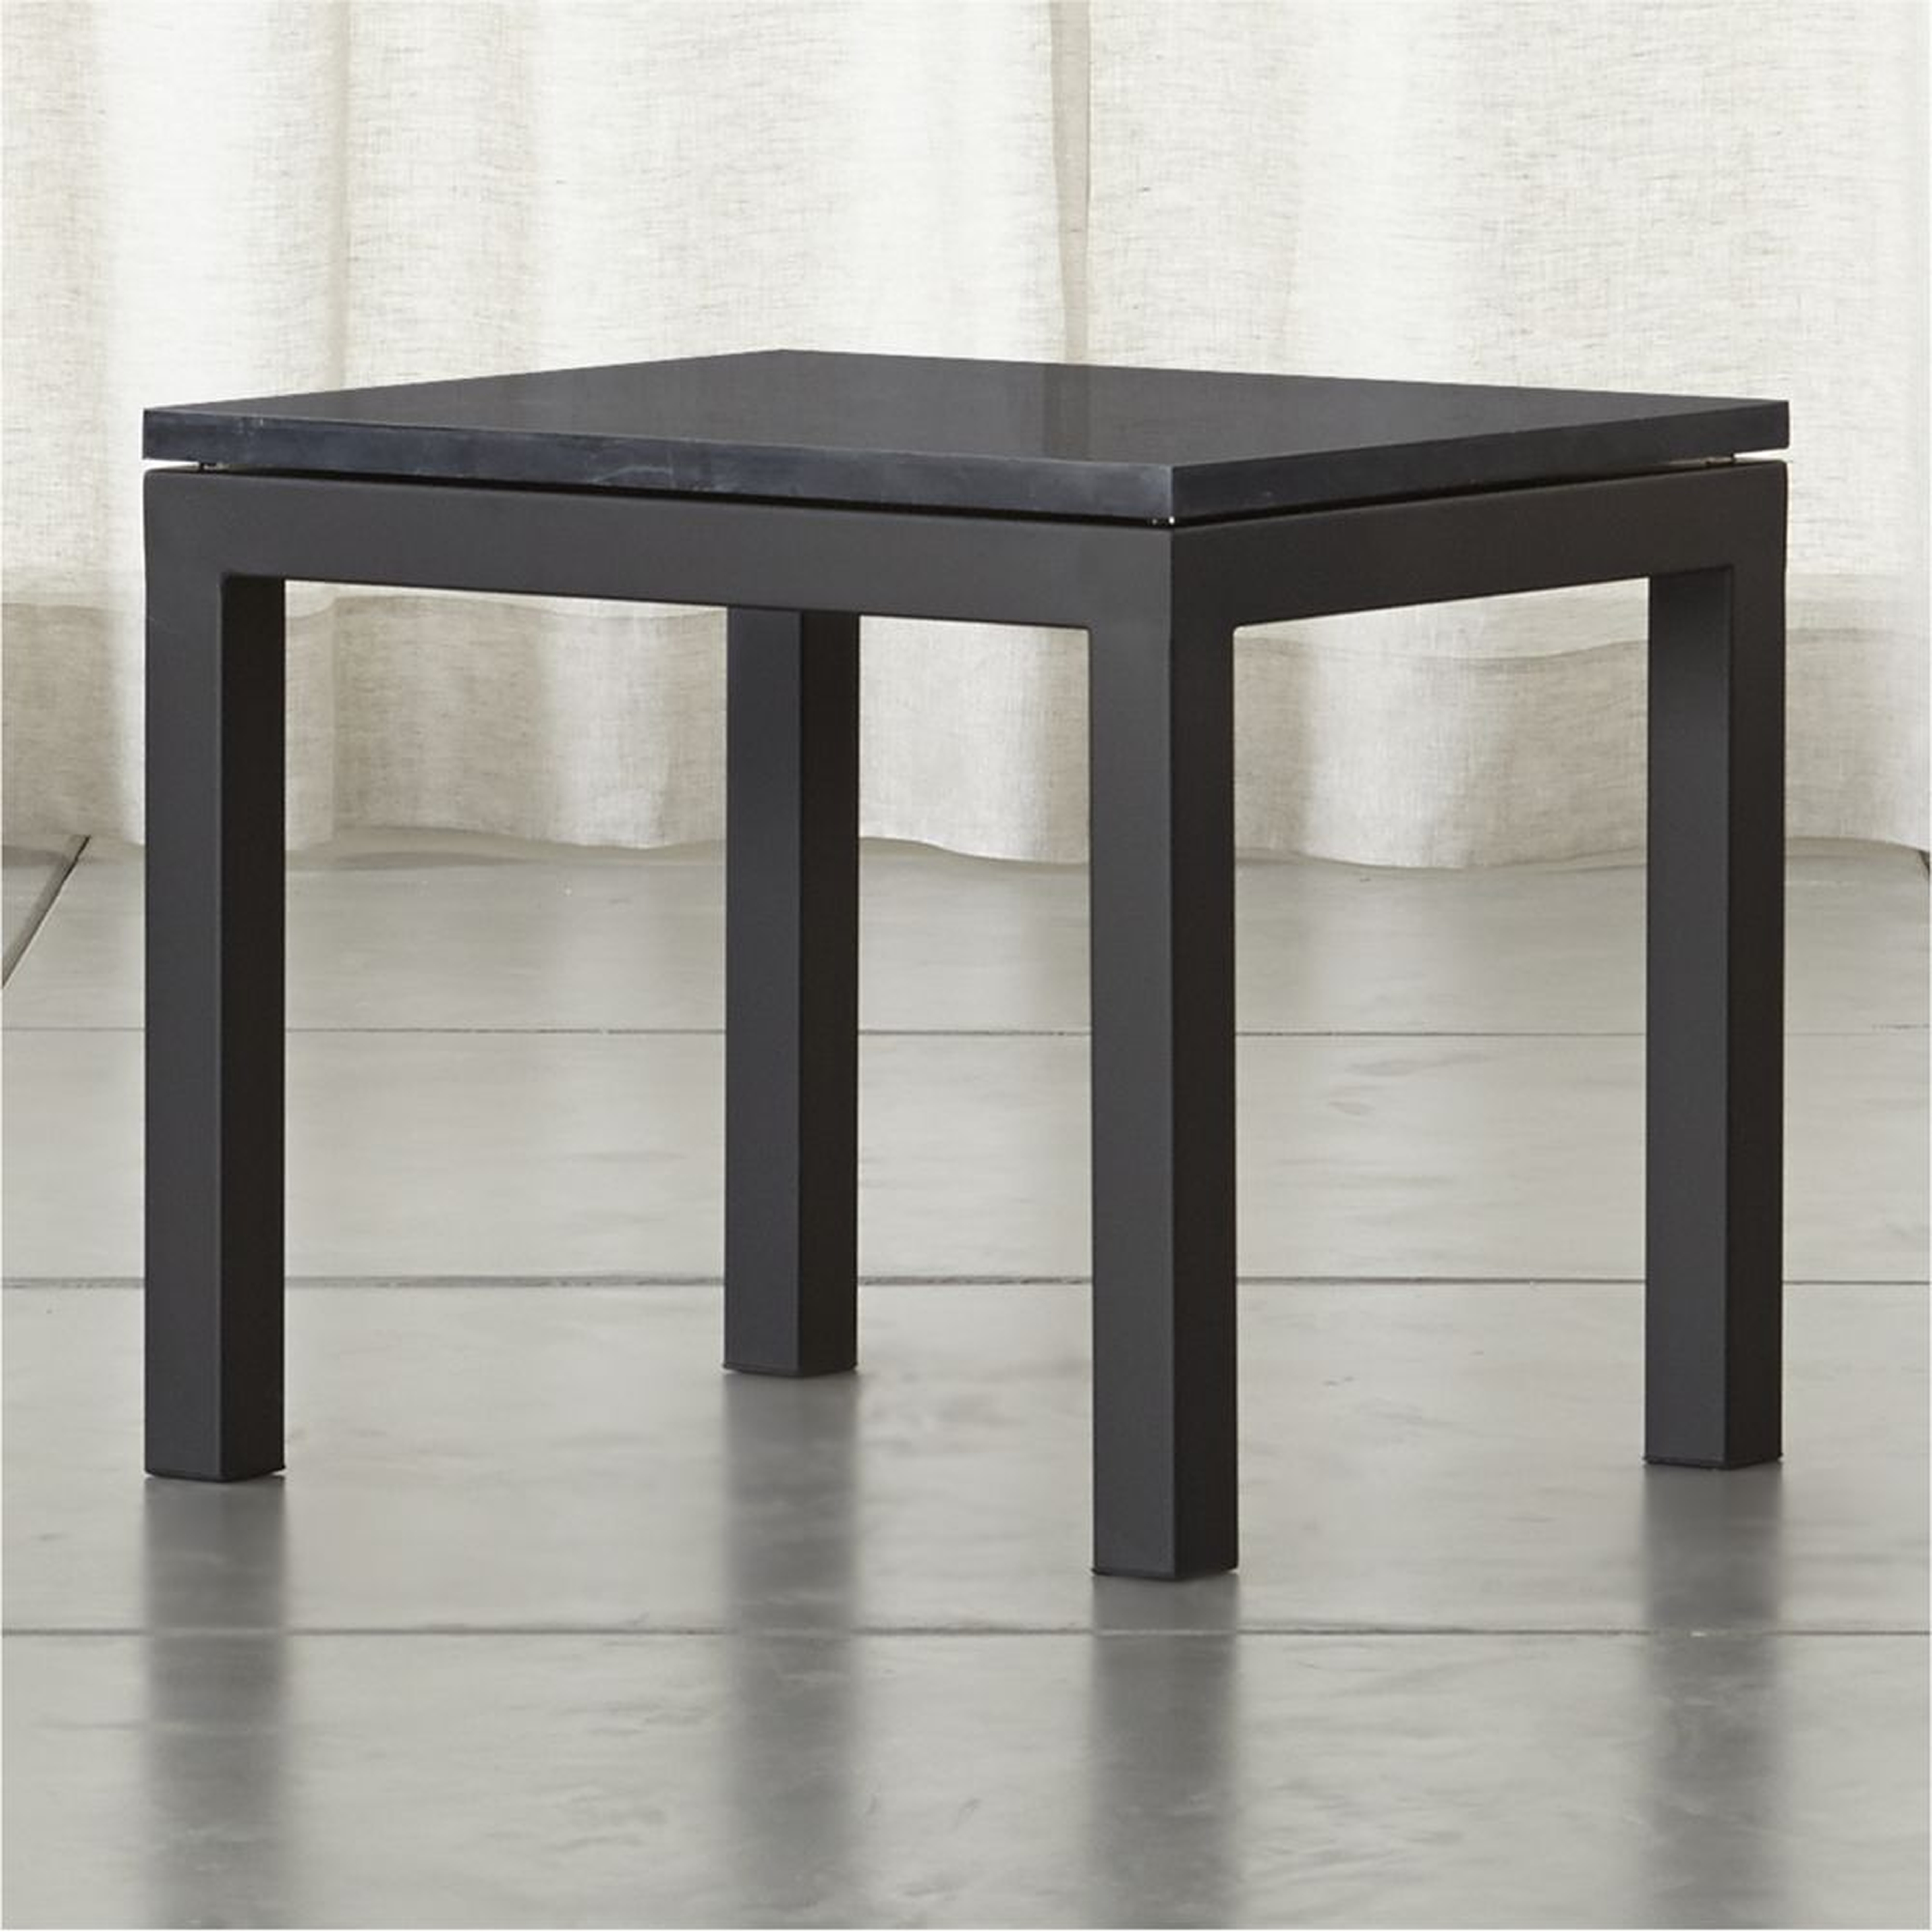 Parsons Black Marble Top/ Dark Steel Base 20x24 End Table - Crate and Barrel